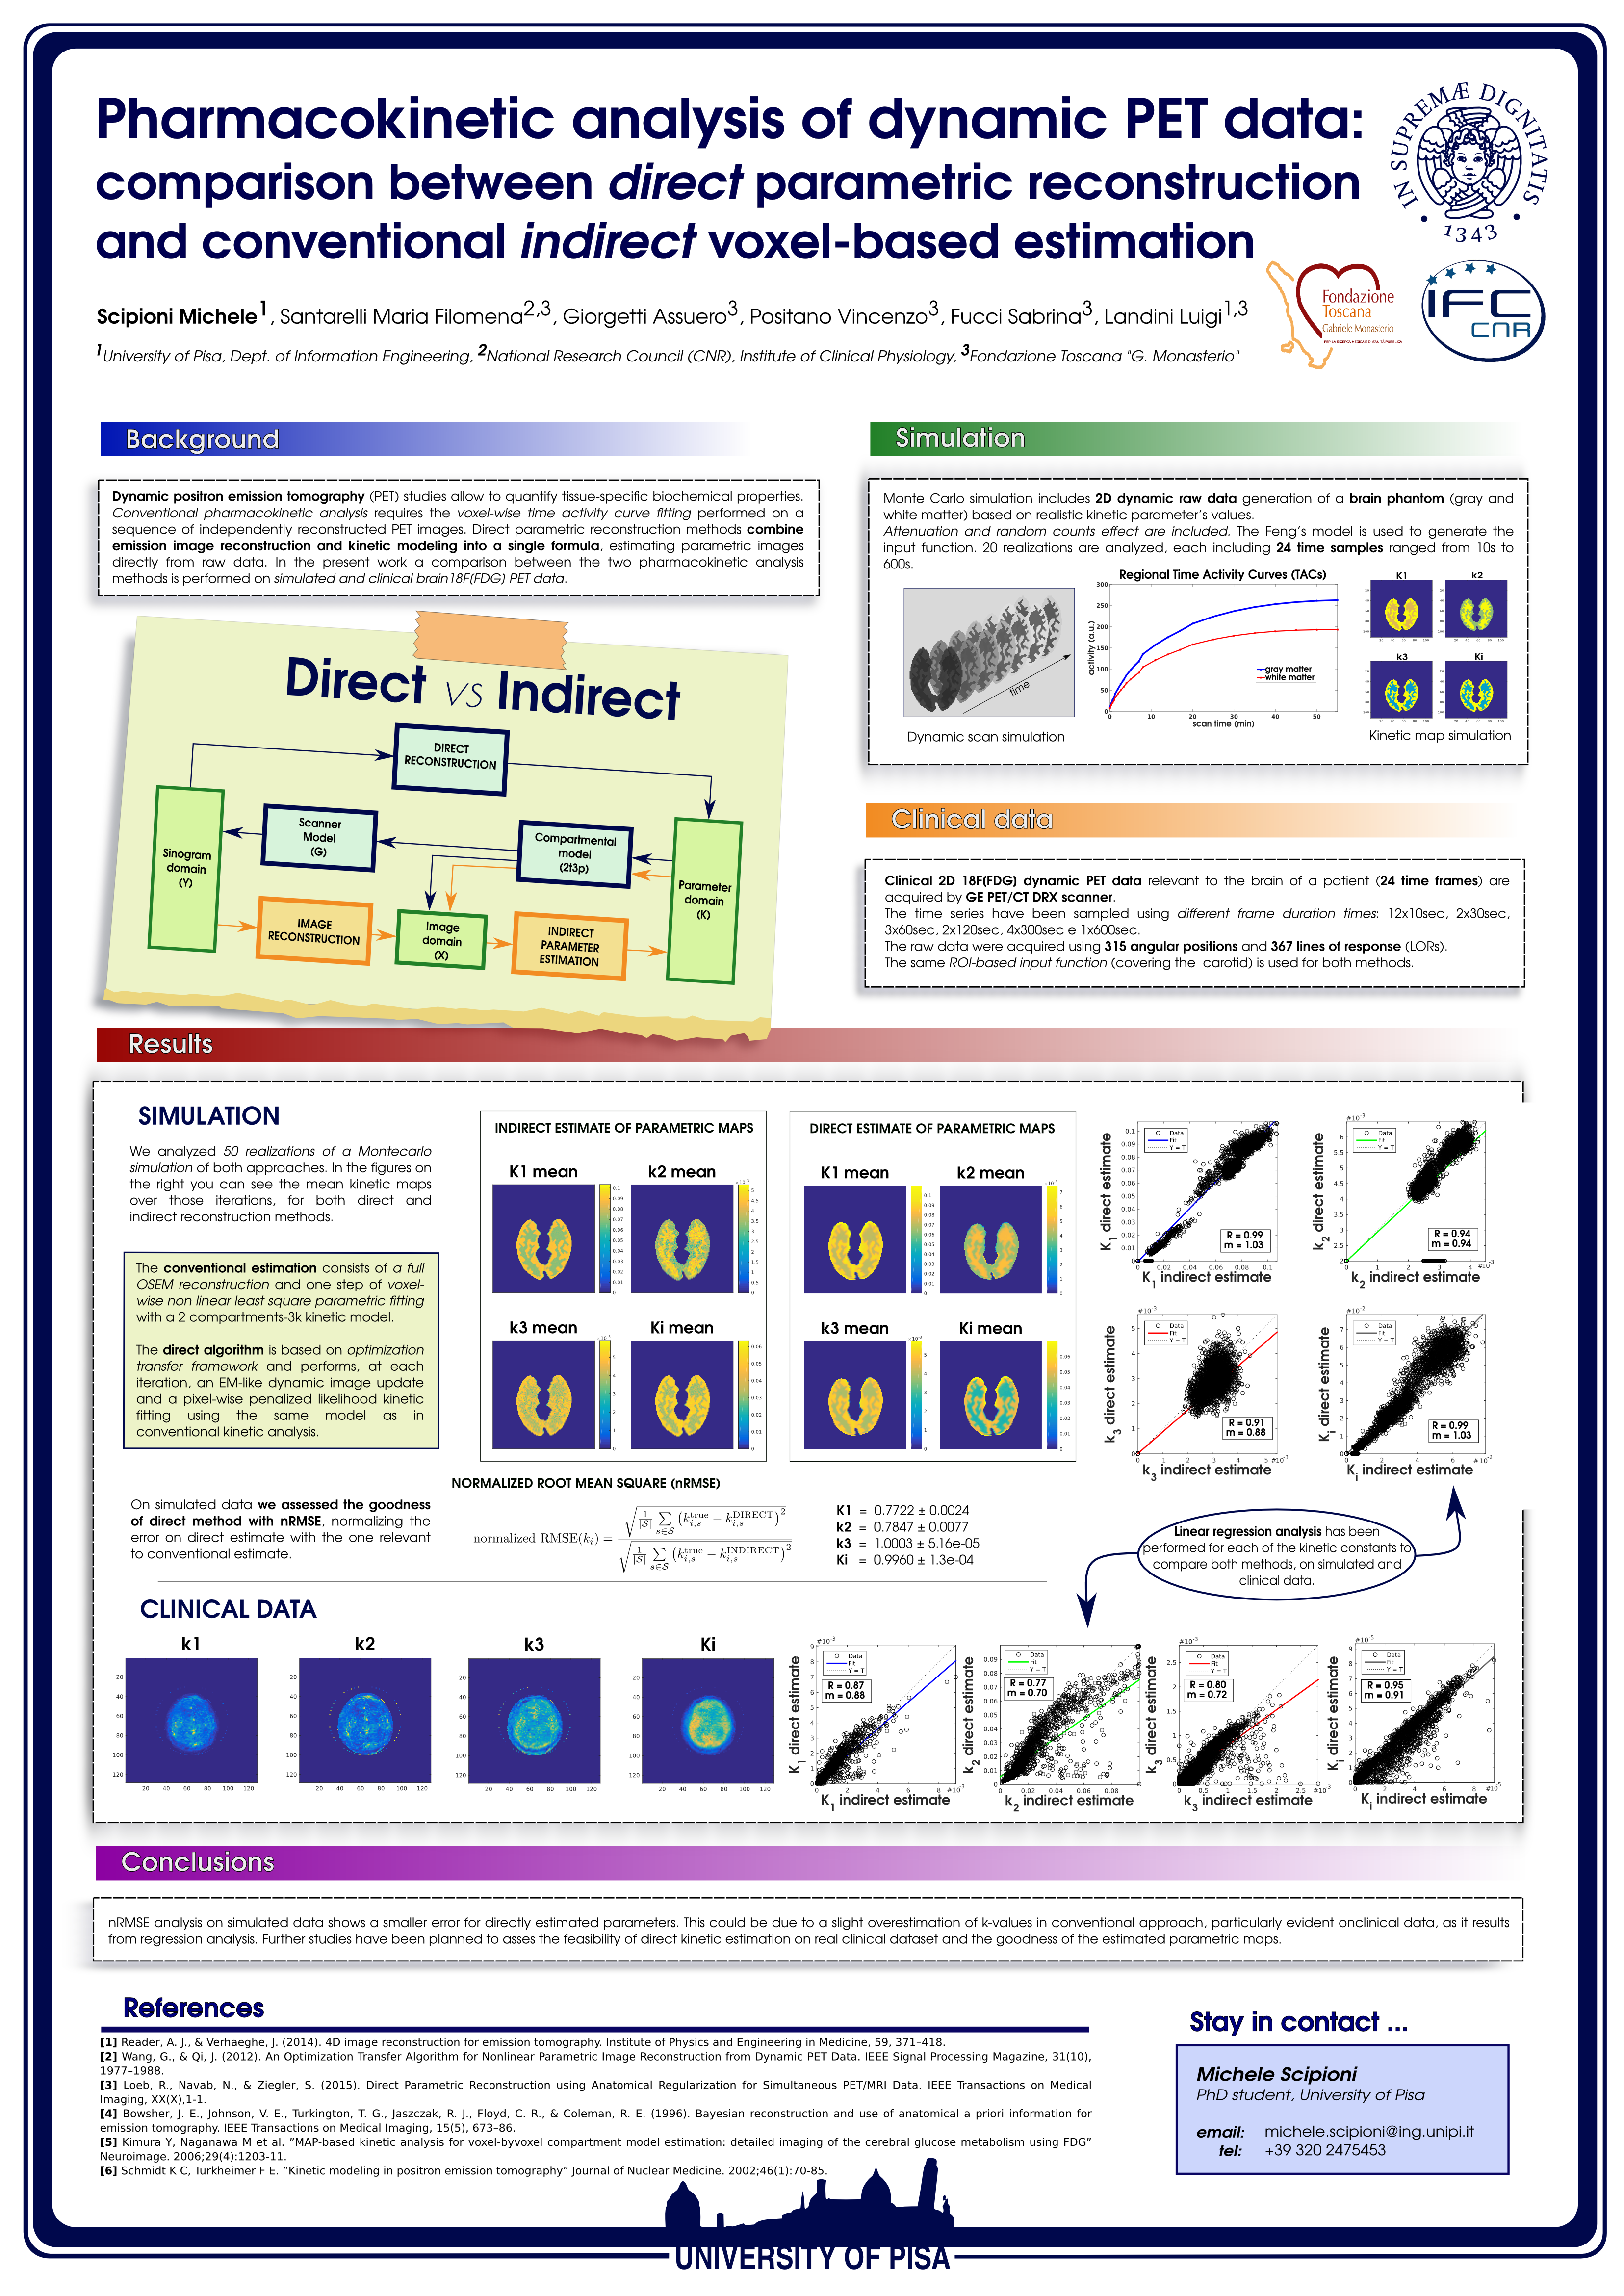 Pharmacokinetic analysis of dynamic PET data: comparison between direct parametric reconstruction and conventional indirect voxel-based estimation - European Molecular Imaging Meeting - 2016 - poster